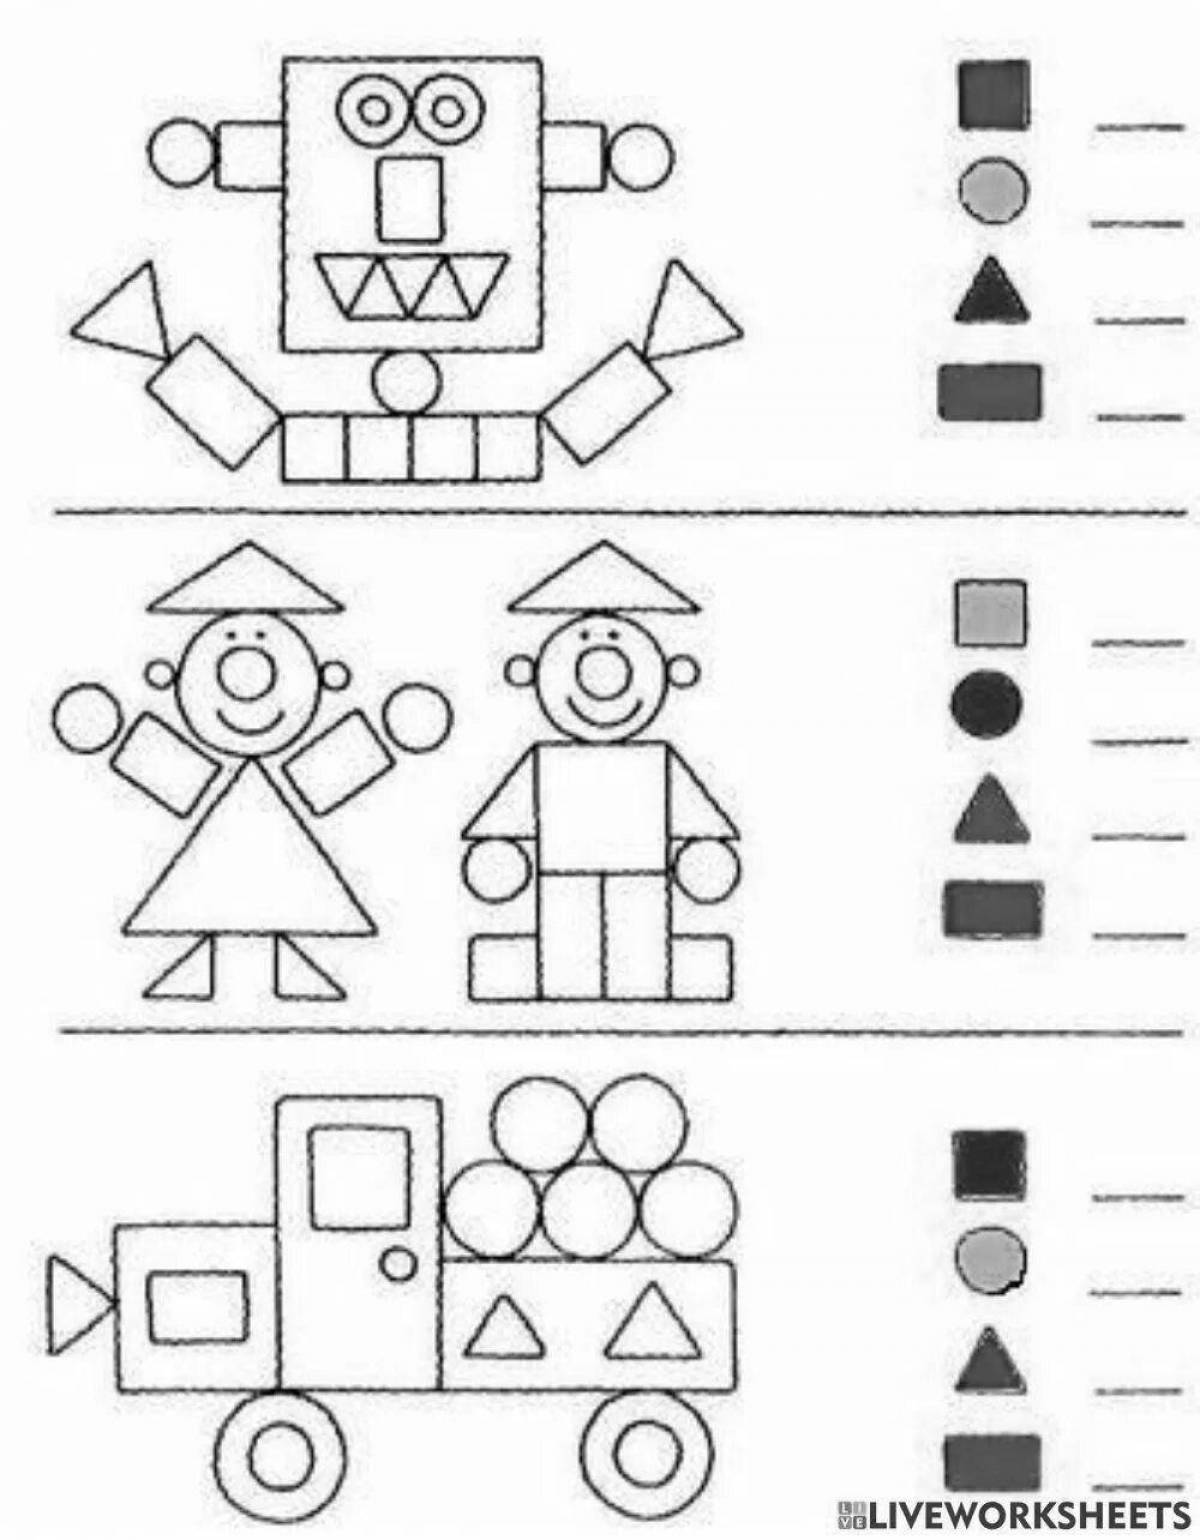 Coloring book with bright geometric shapes for preschoolers